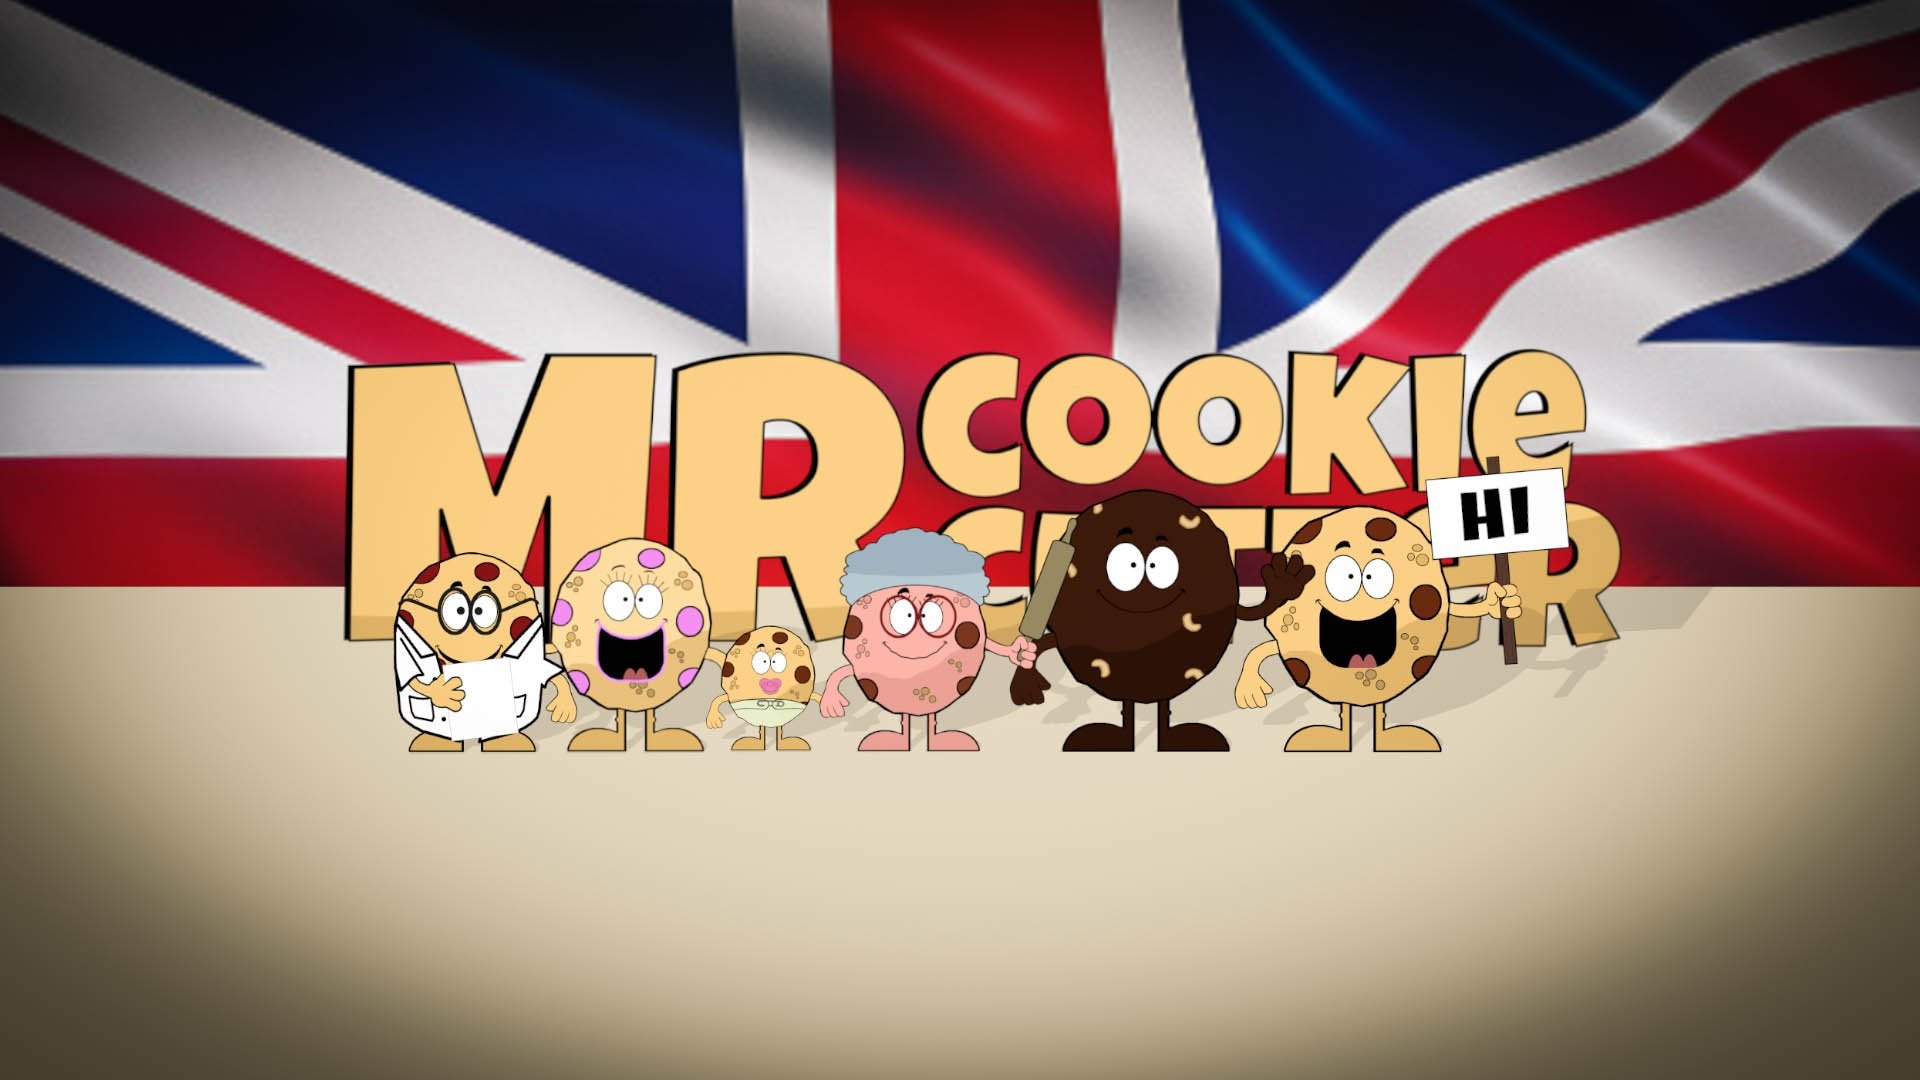 About Us Page Banner with Mr Cookie Cutter Characters